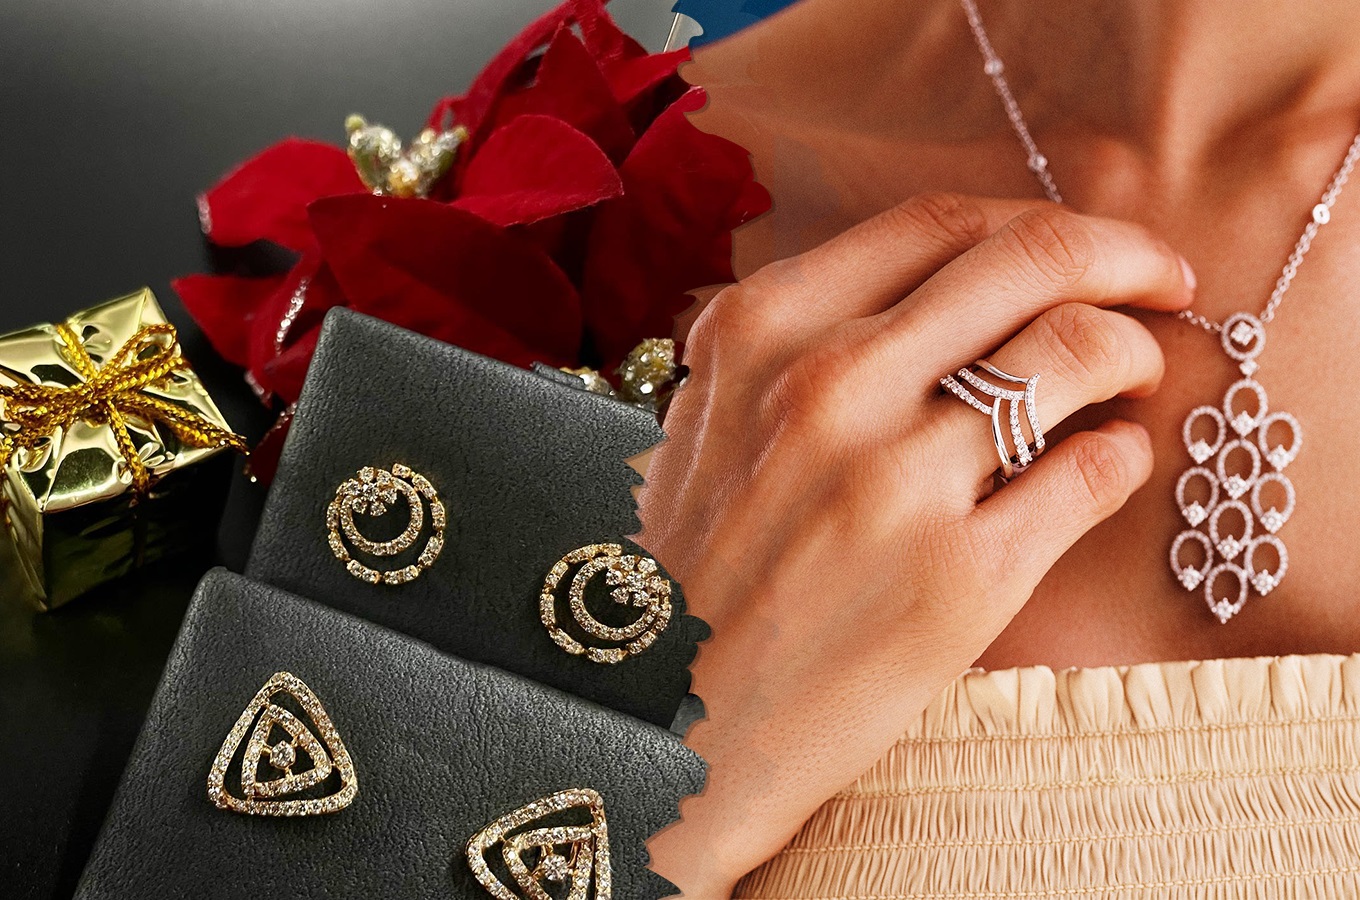 Personalized Jewelry Trends for New Year's Eve